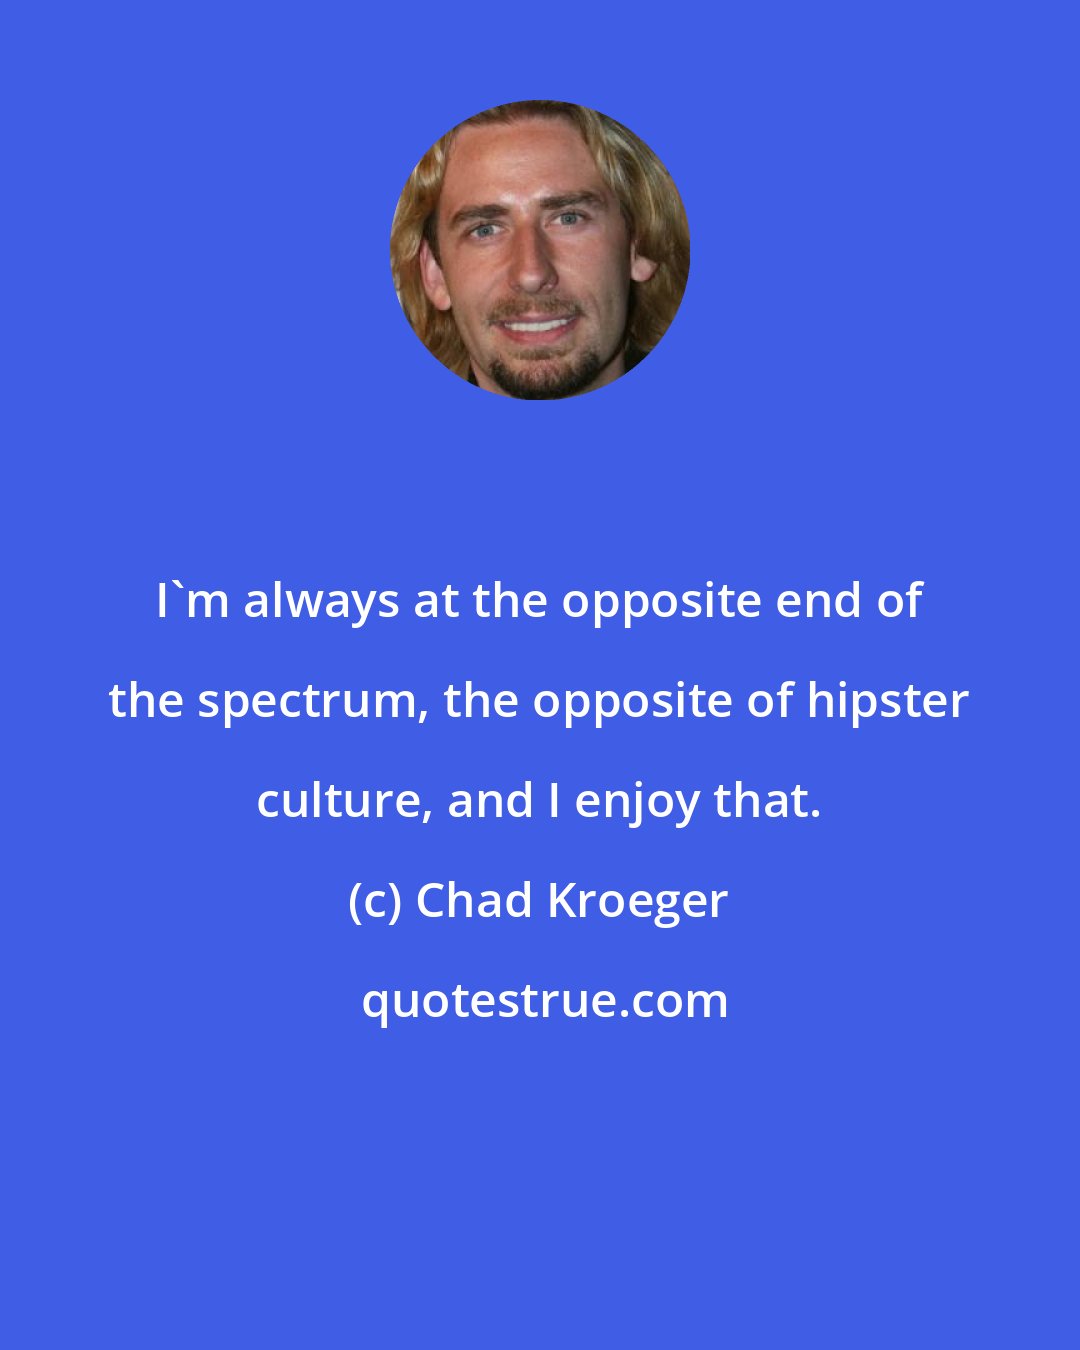 Chad Kroeger: I'm always at the opposite end of the spectrum, the opposite of hipster culture, and I enjoy that.